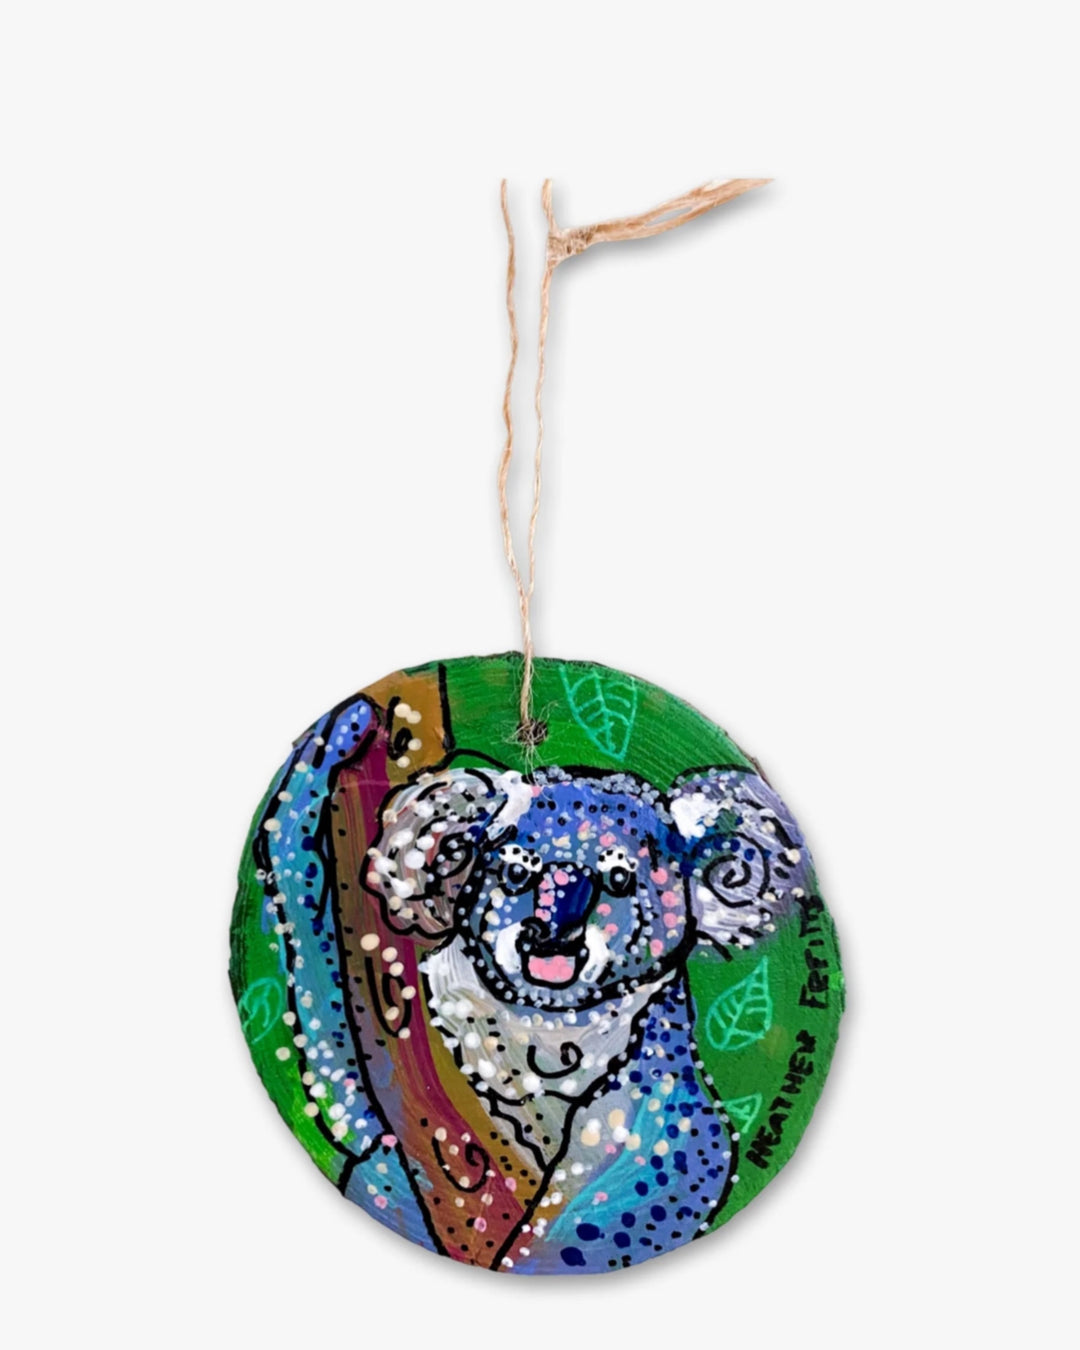 Sydney - Hand Painted Ornament